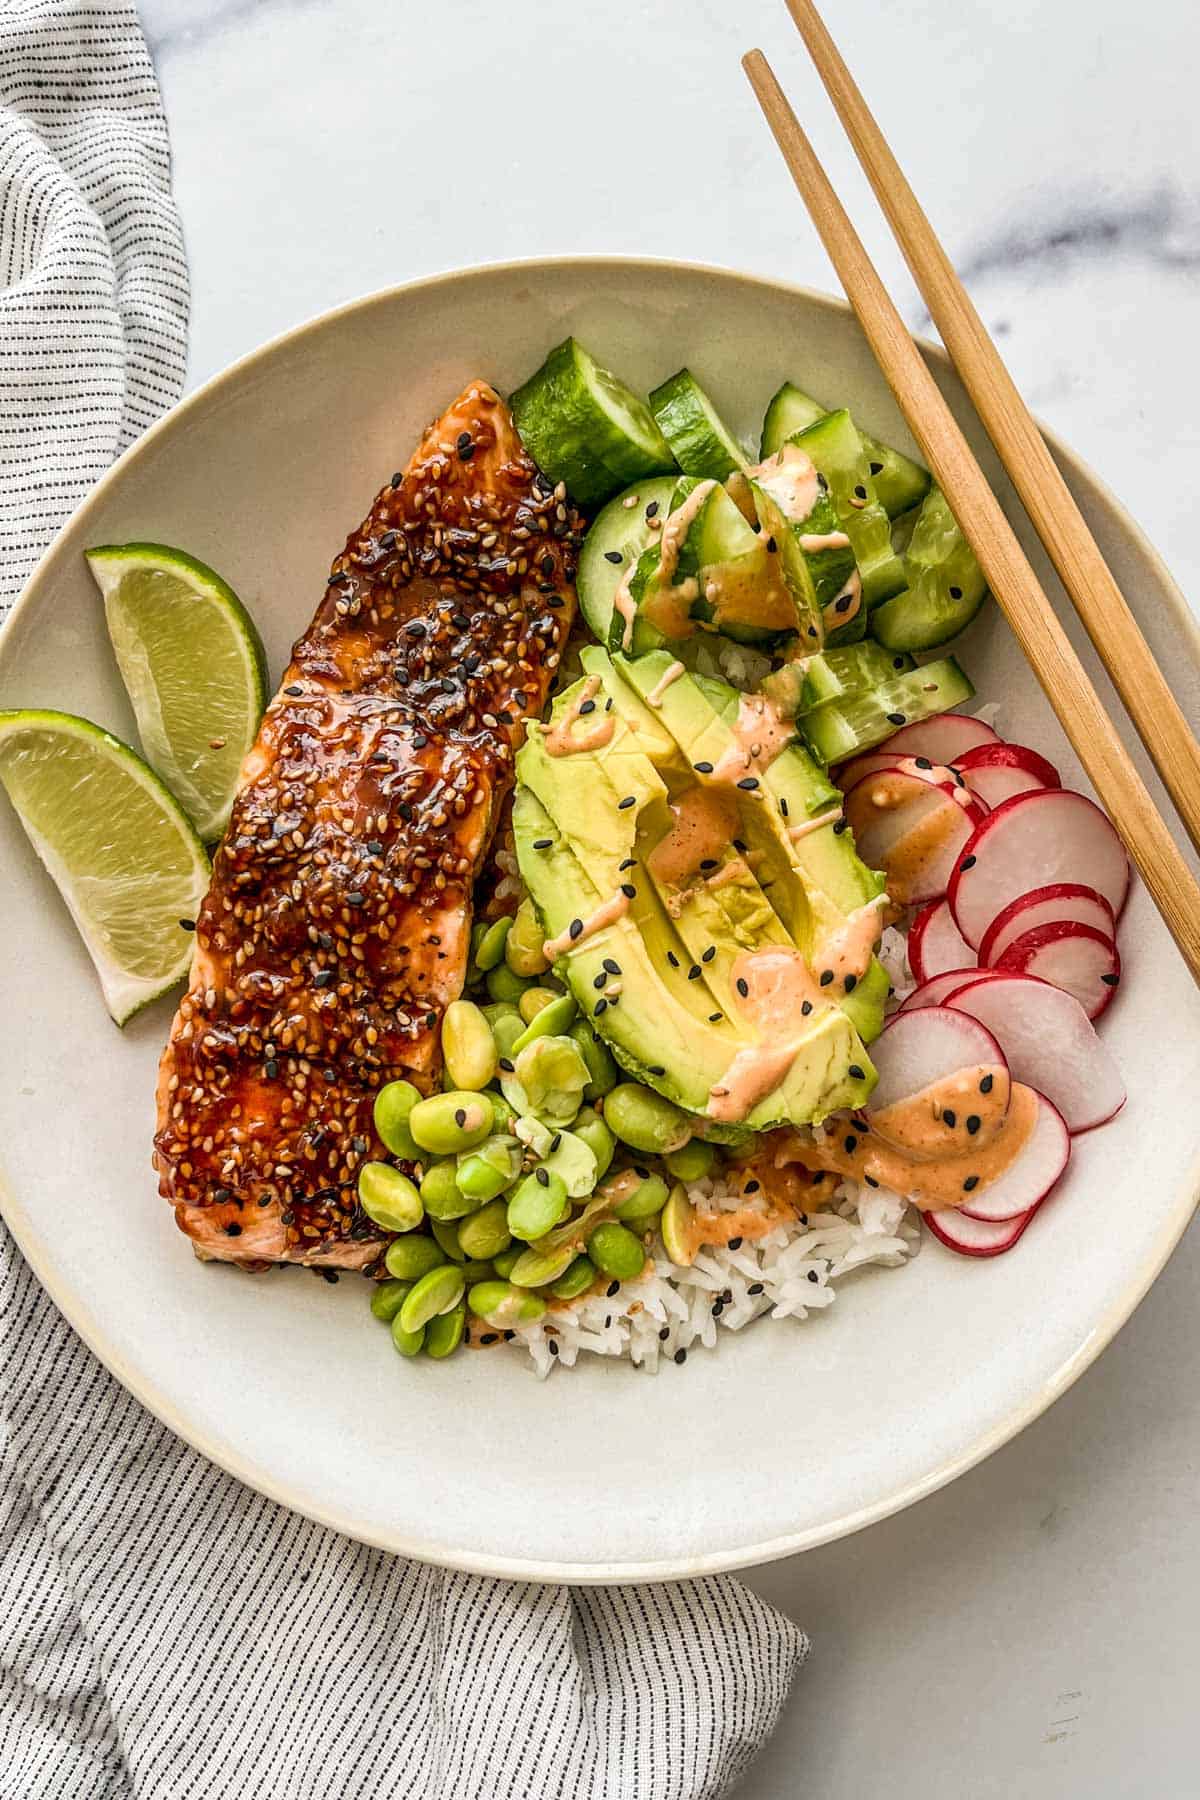 Teriyaki salmon in a bowl with rice and vegetables.